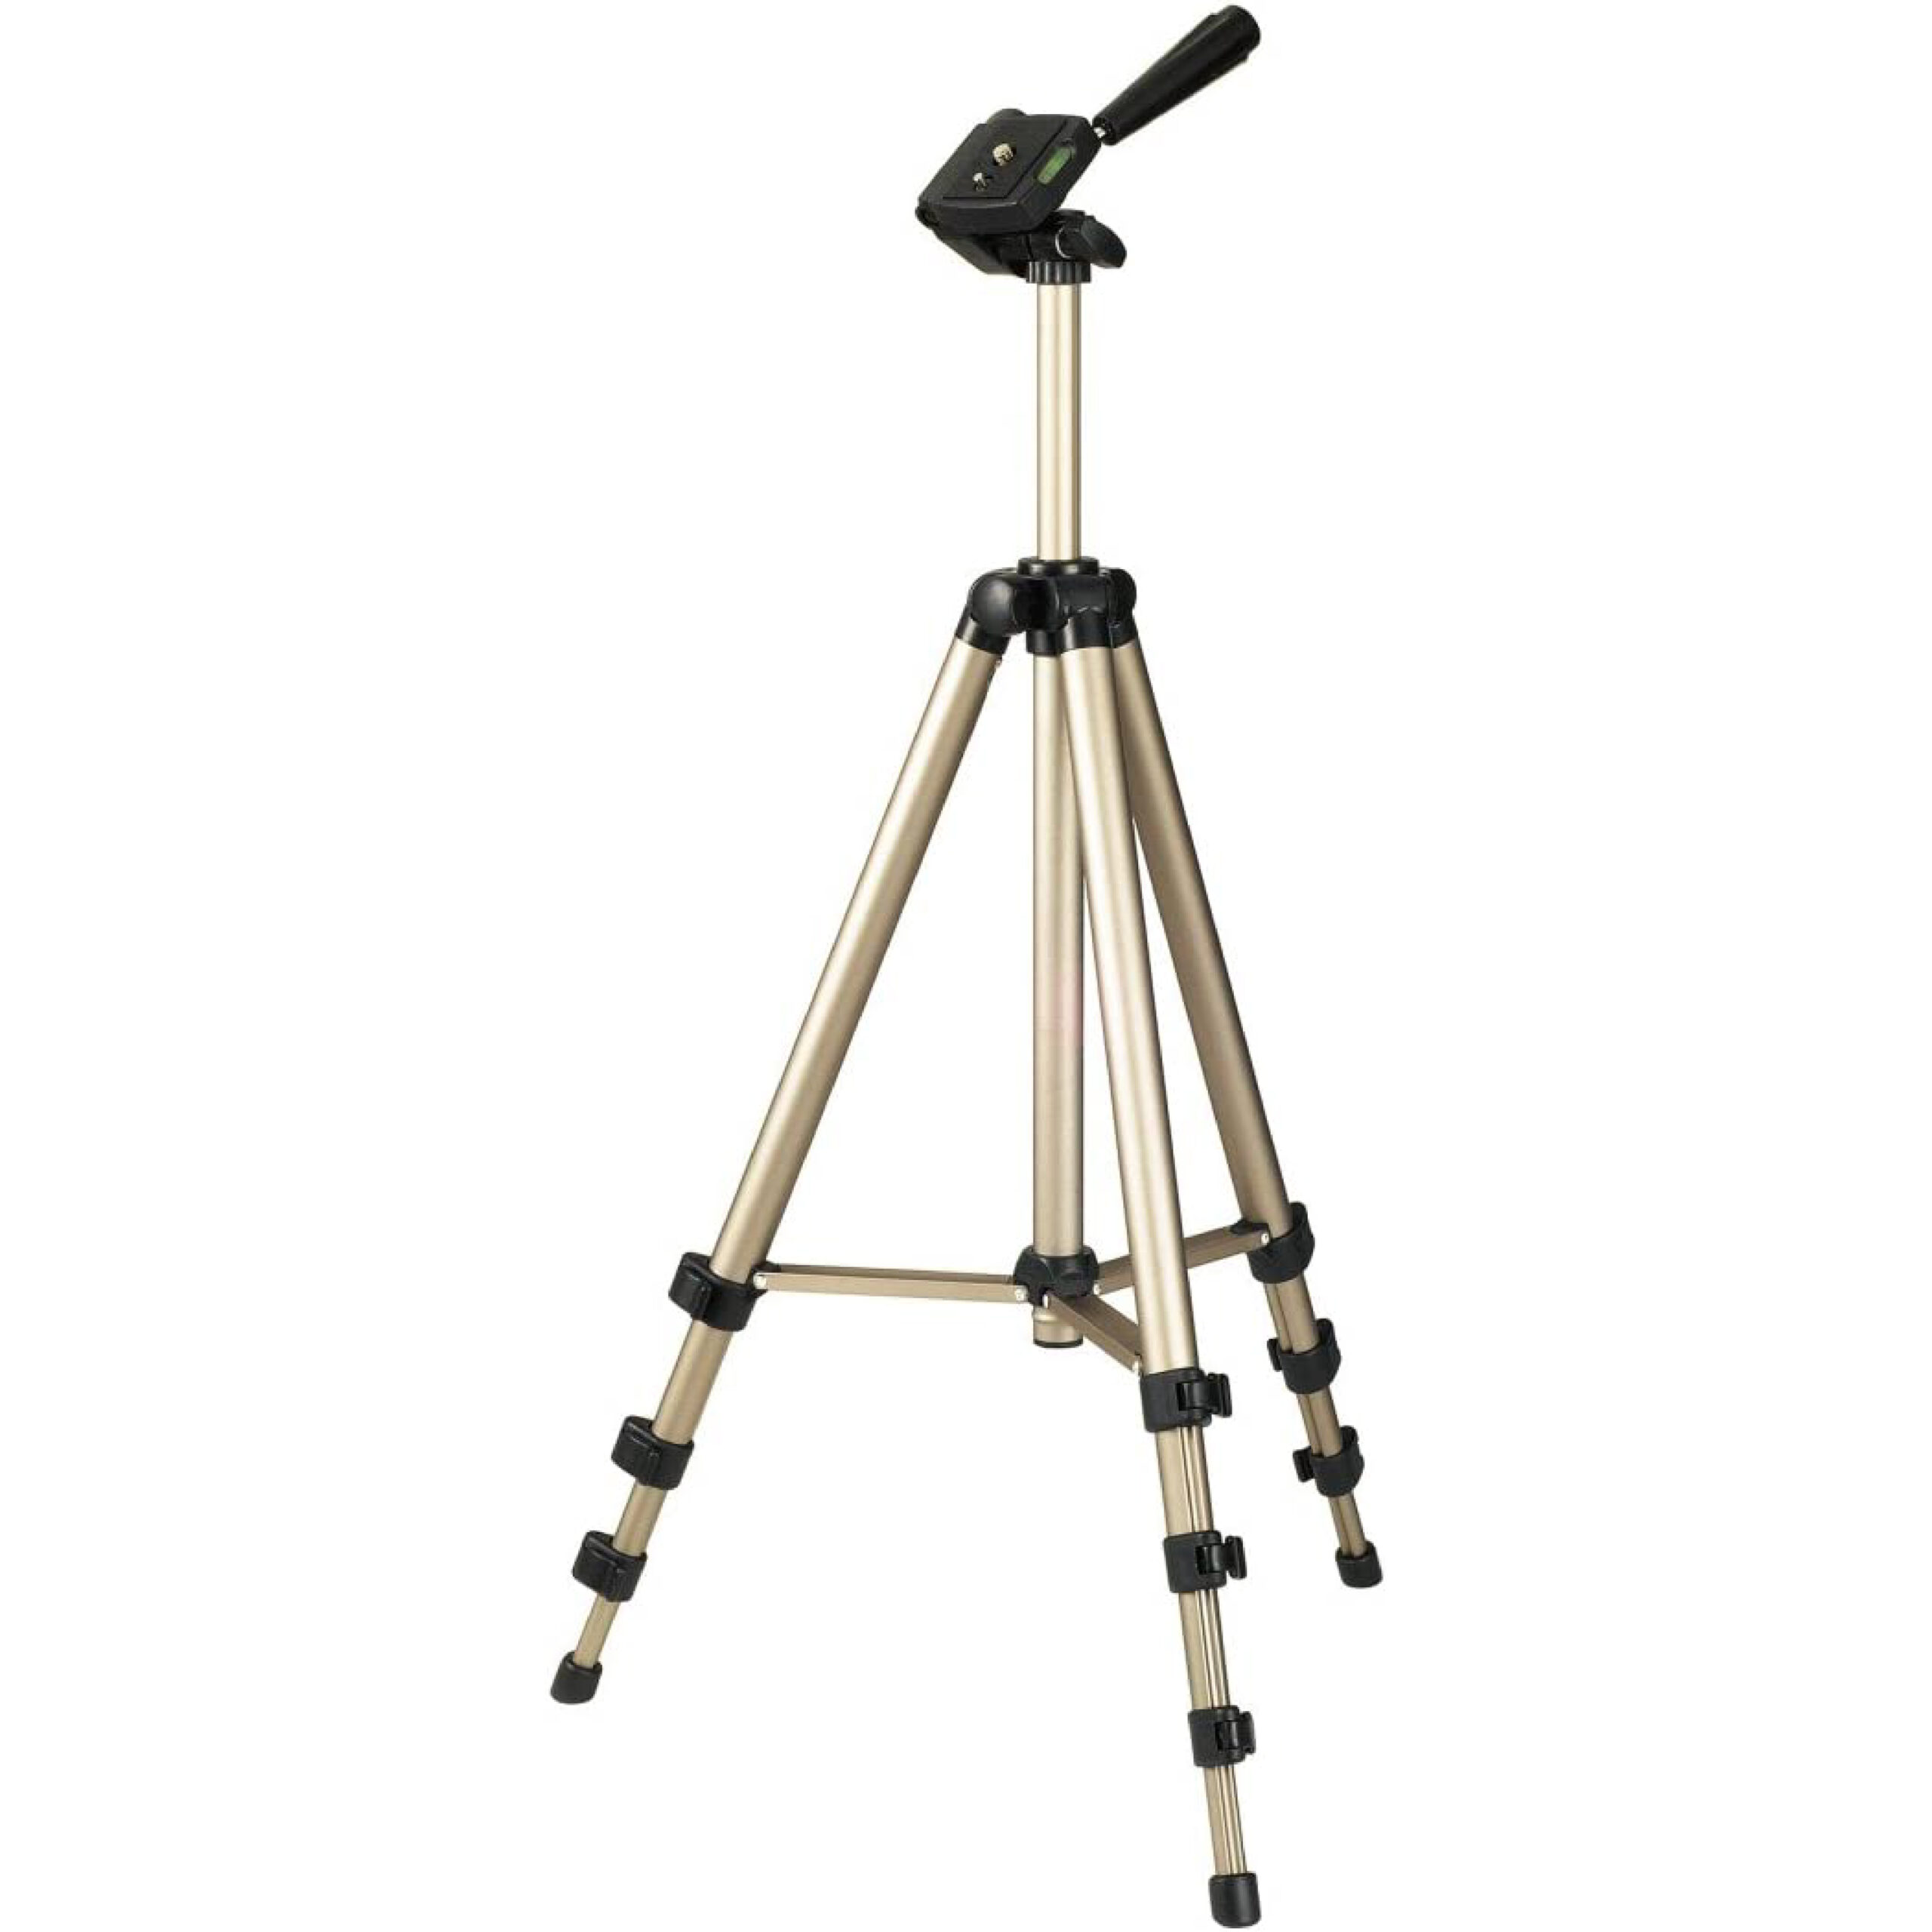 Hama Tripod Star 700 EF Digital. Patrick Will's tripod for his podcast WillCast and content creation.